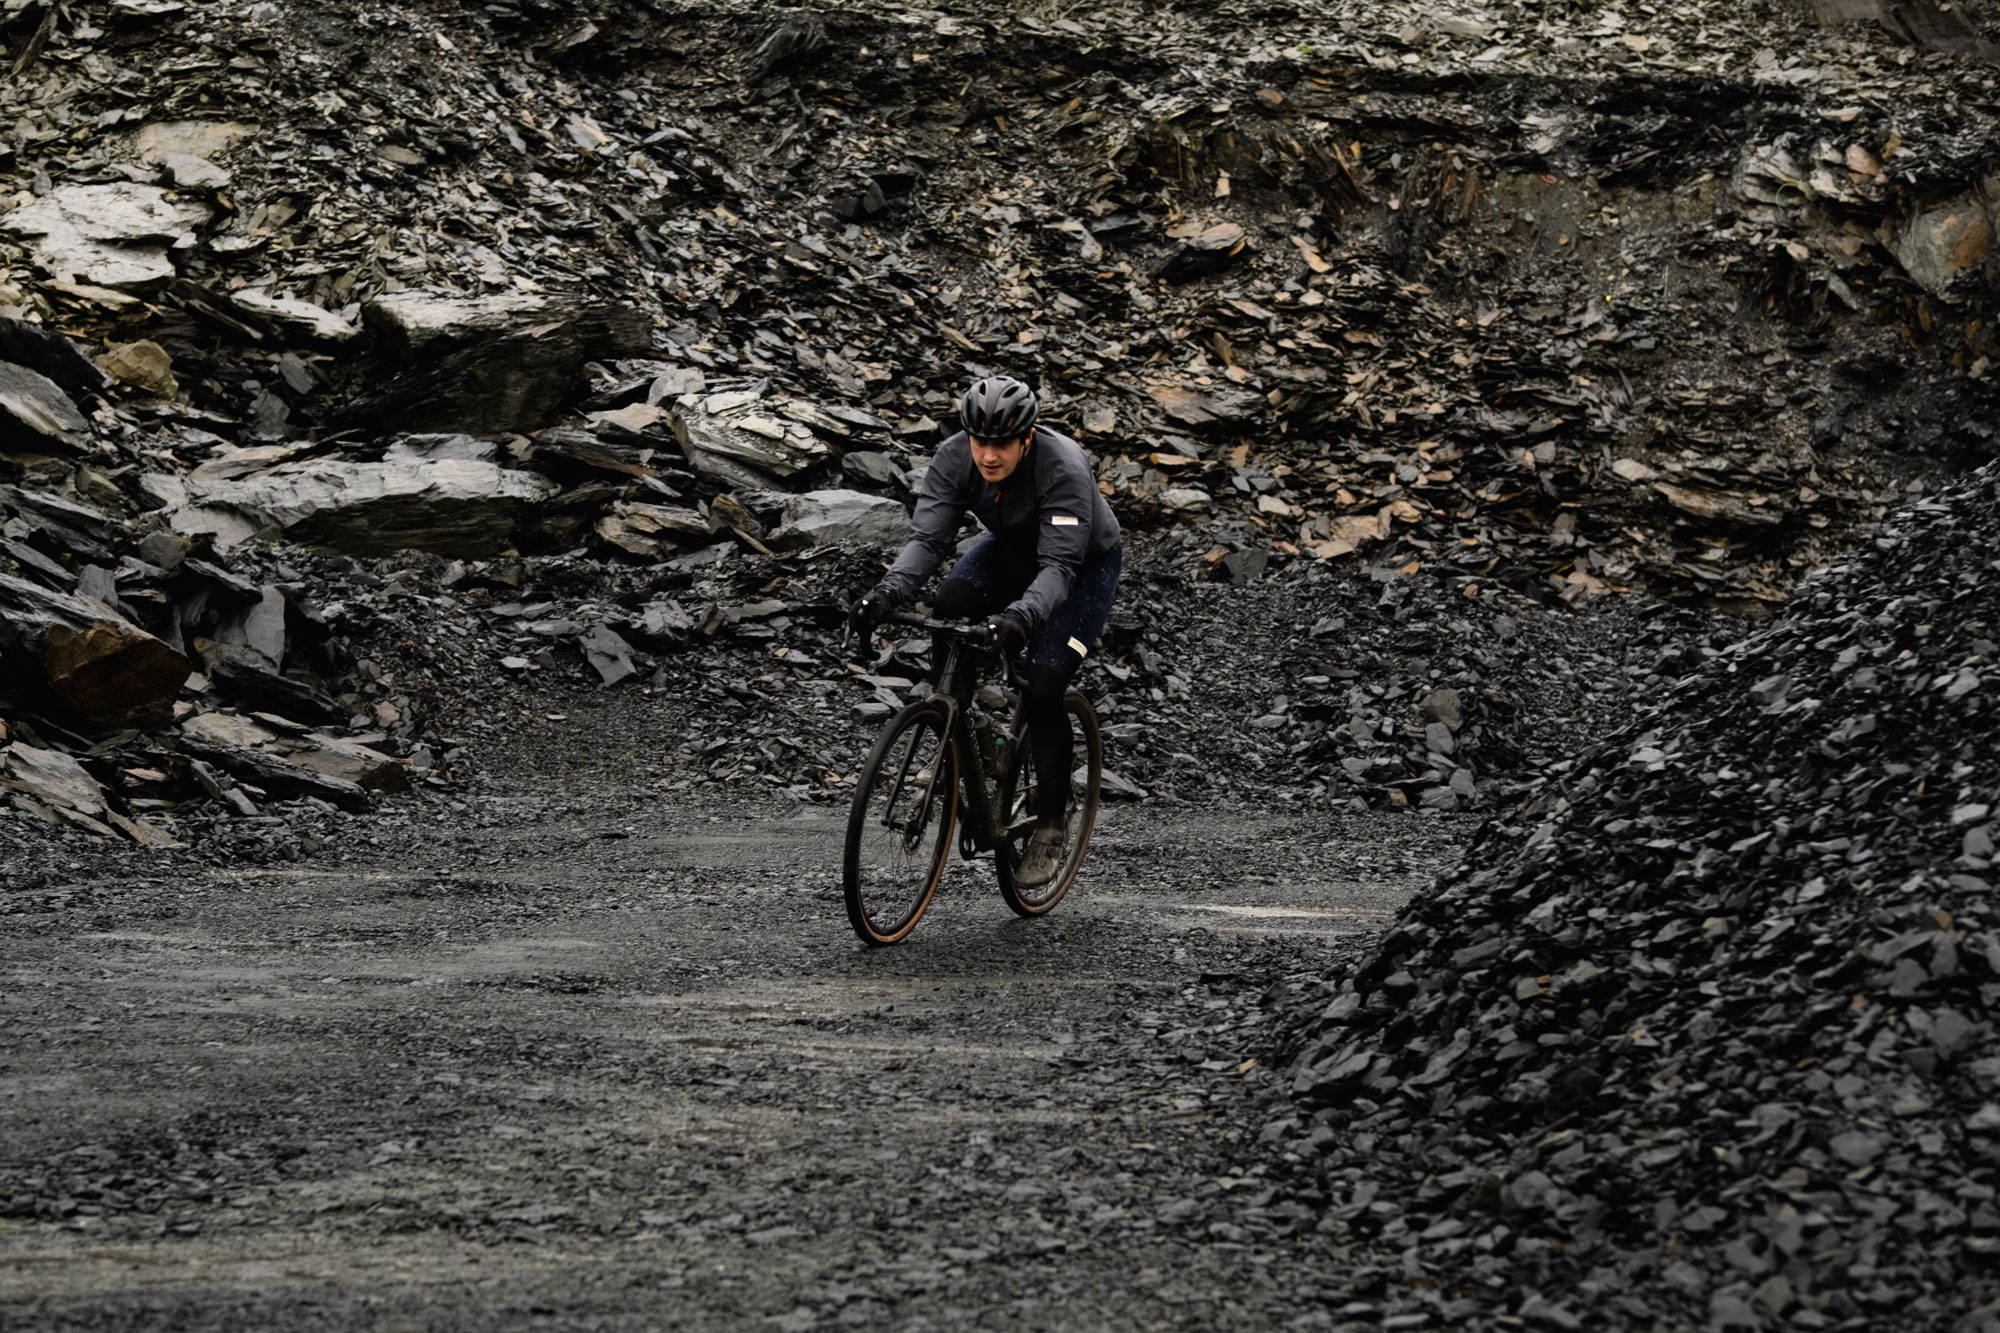 Cyclist riding in heavy gravel